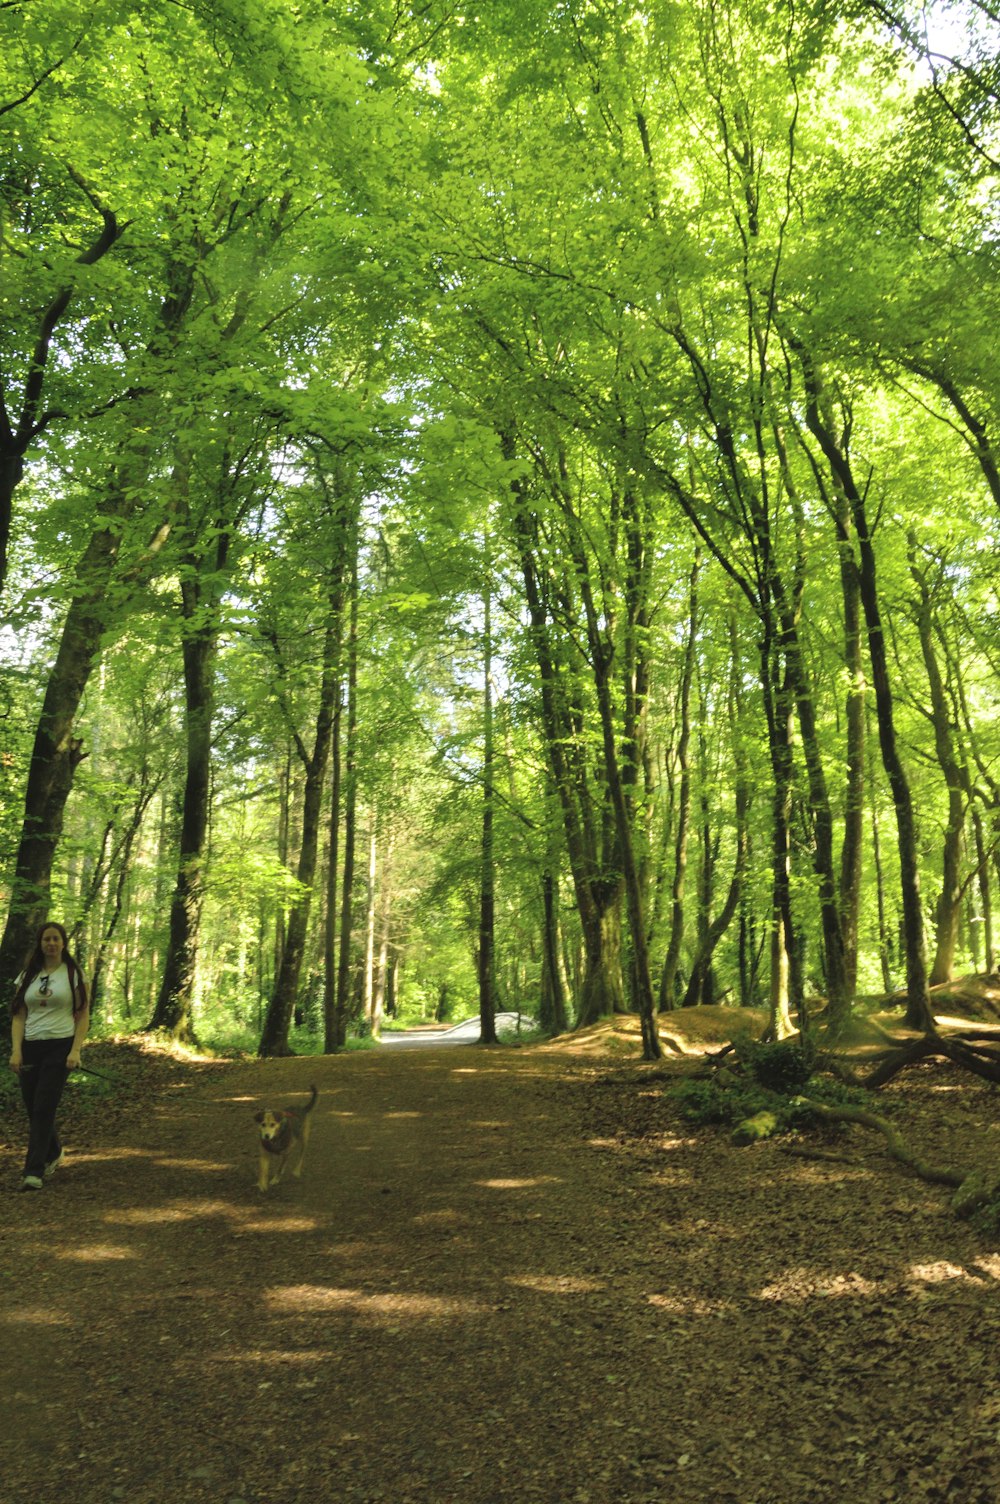 a person walking a dog through a forest